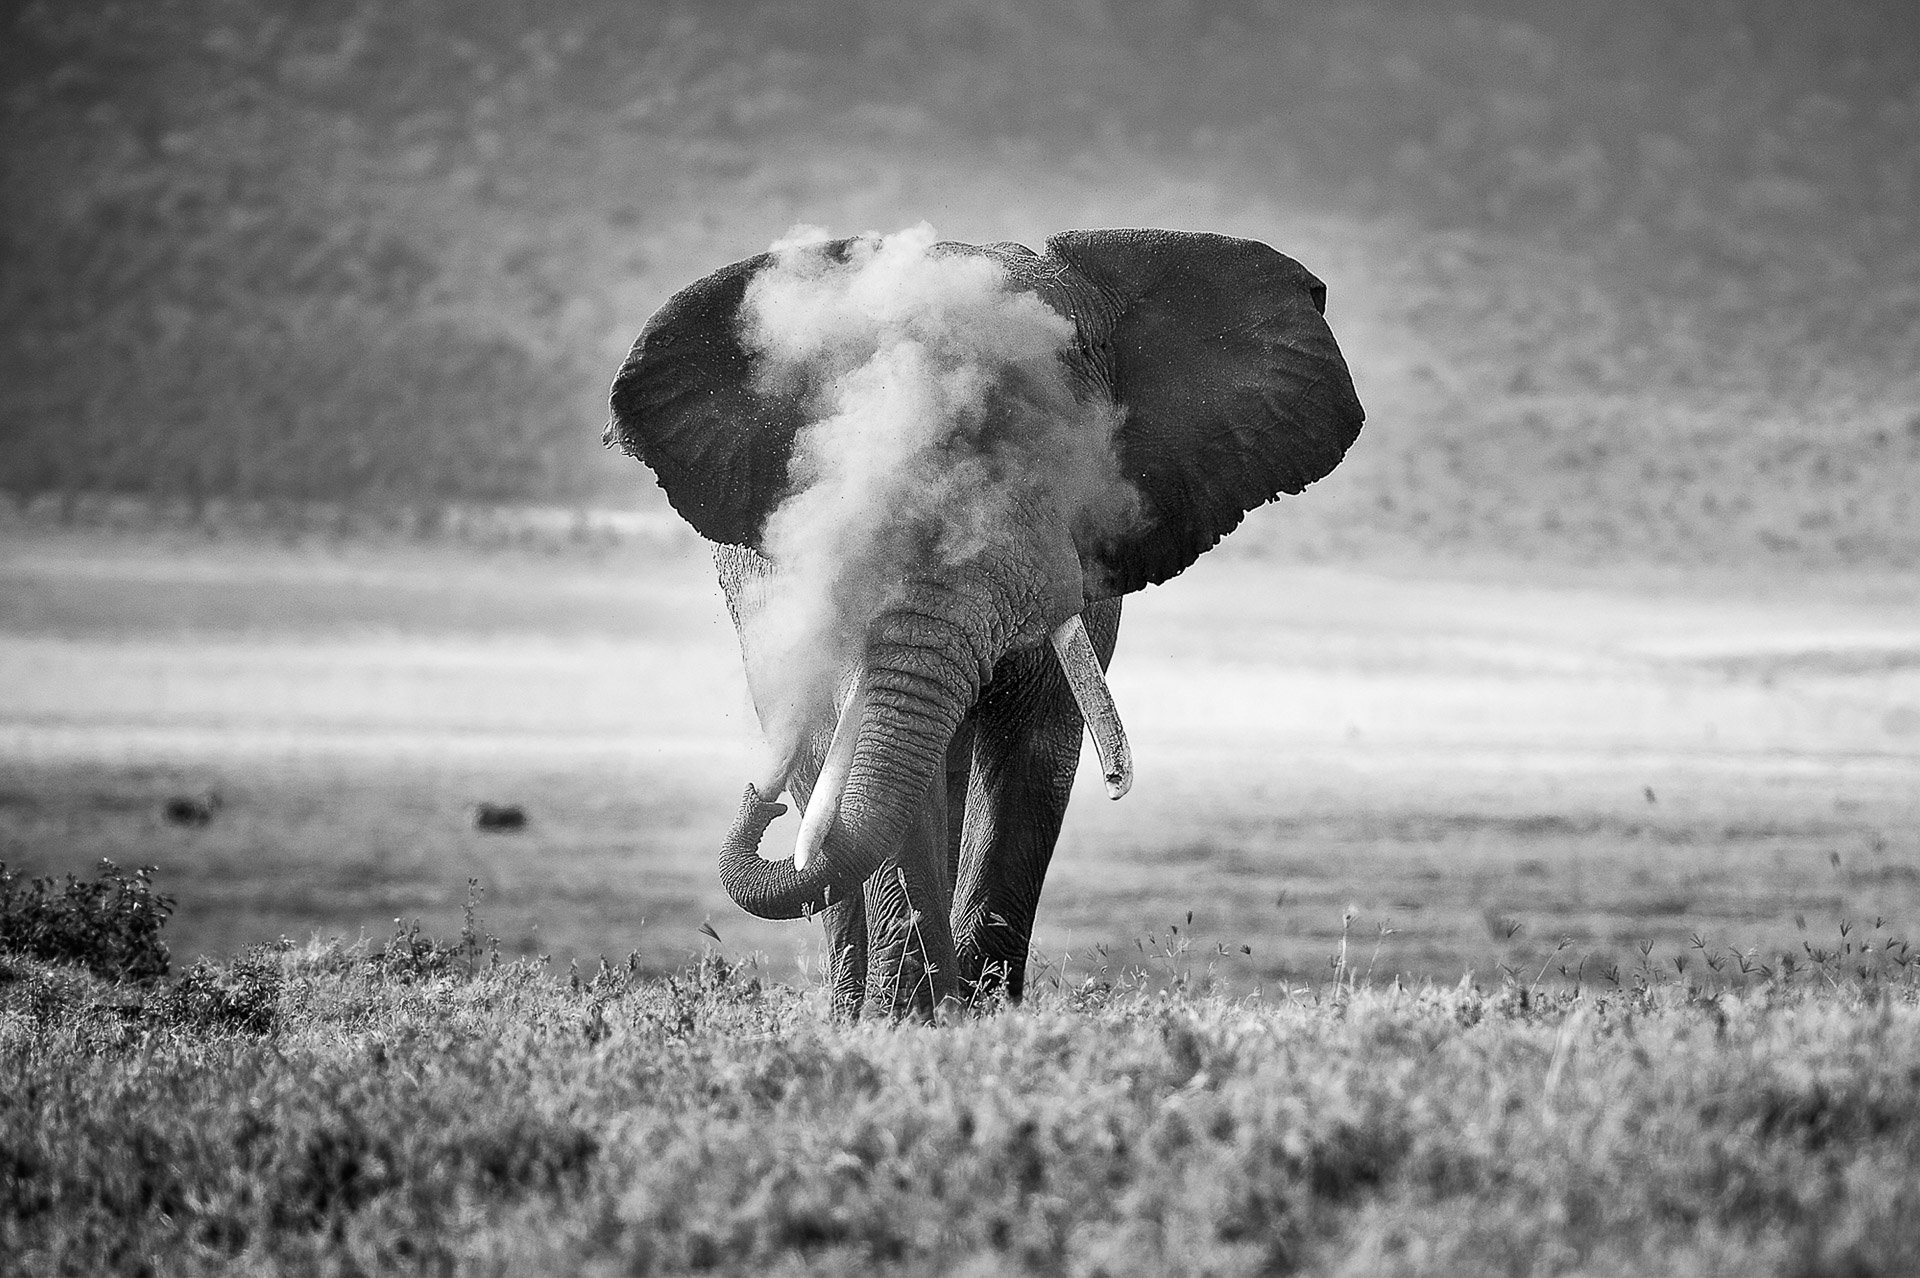 An African elephant blowing dust in the Ngorongoro Crater in Tanzania, Africa.